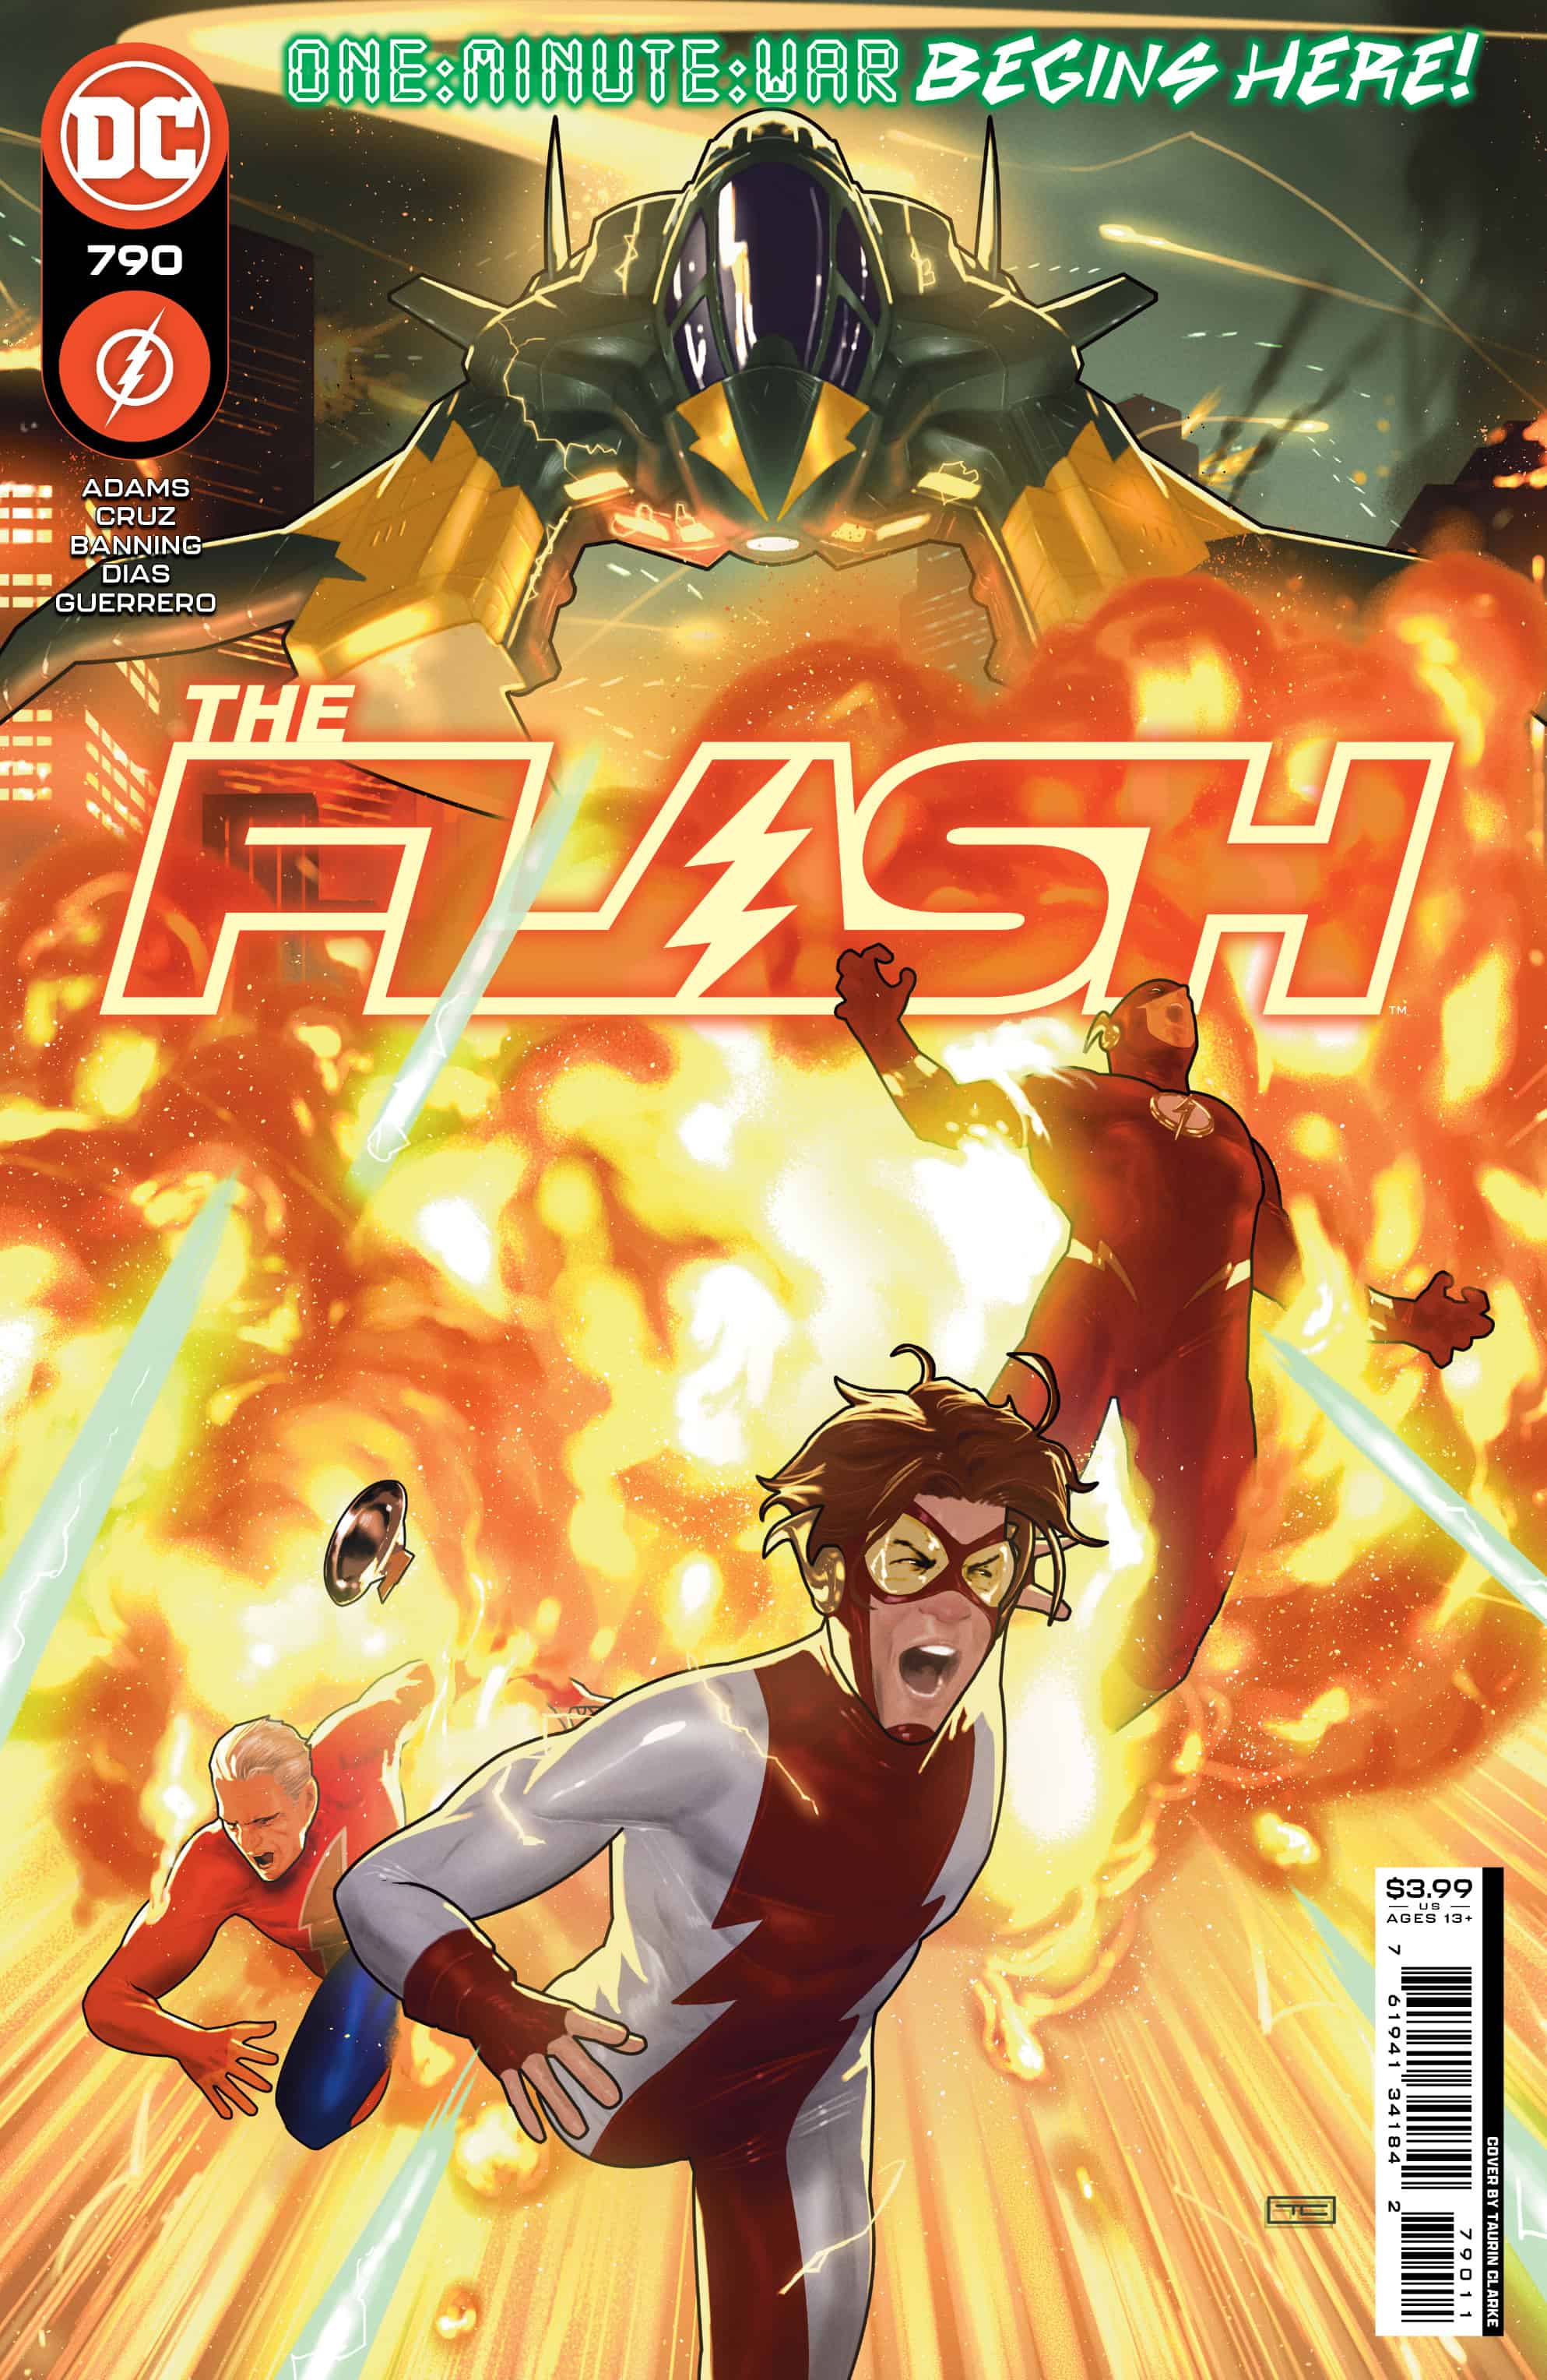 The Flash #790: Who Can Outrun the Fraction?! - Comic Watch